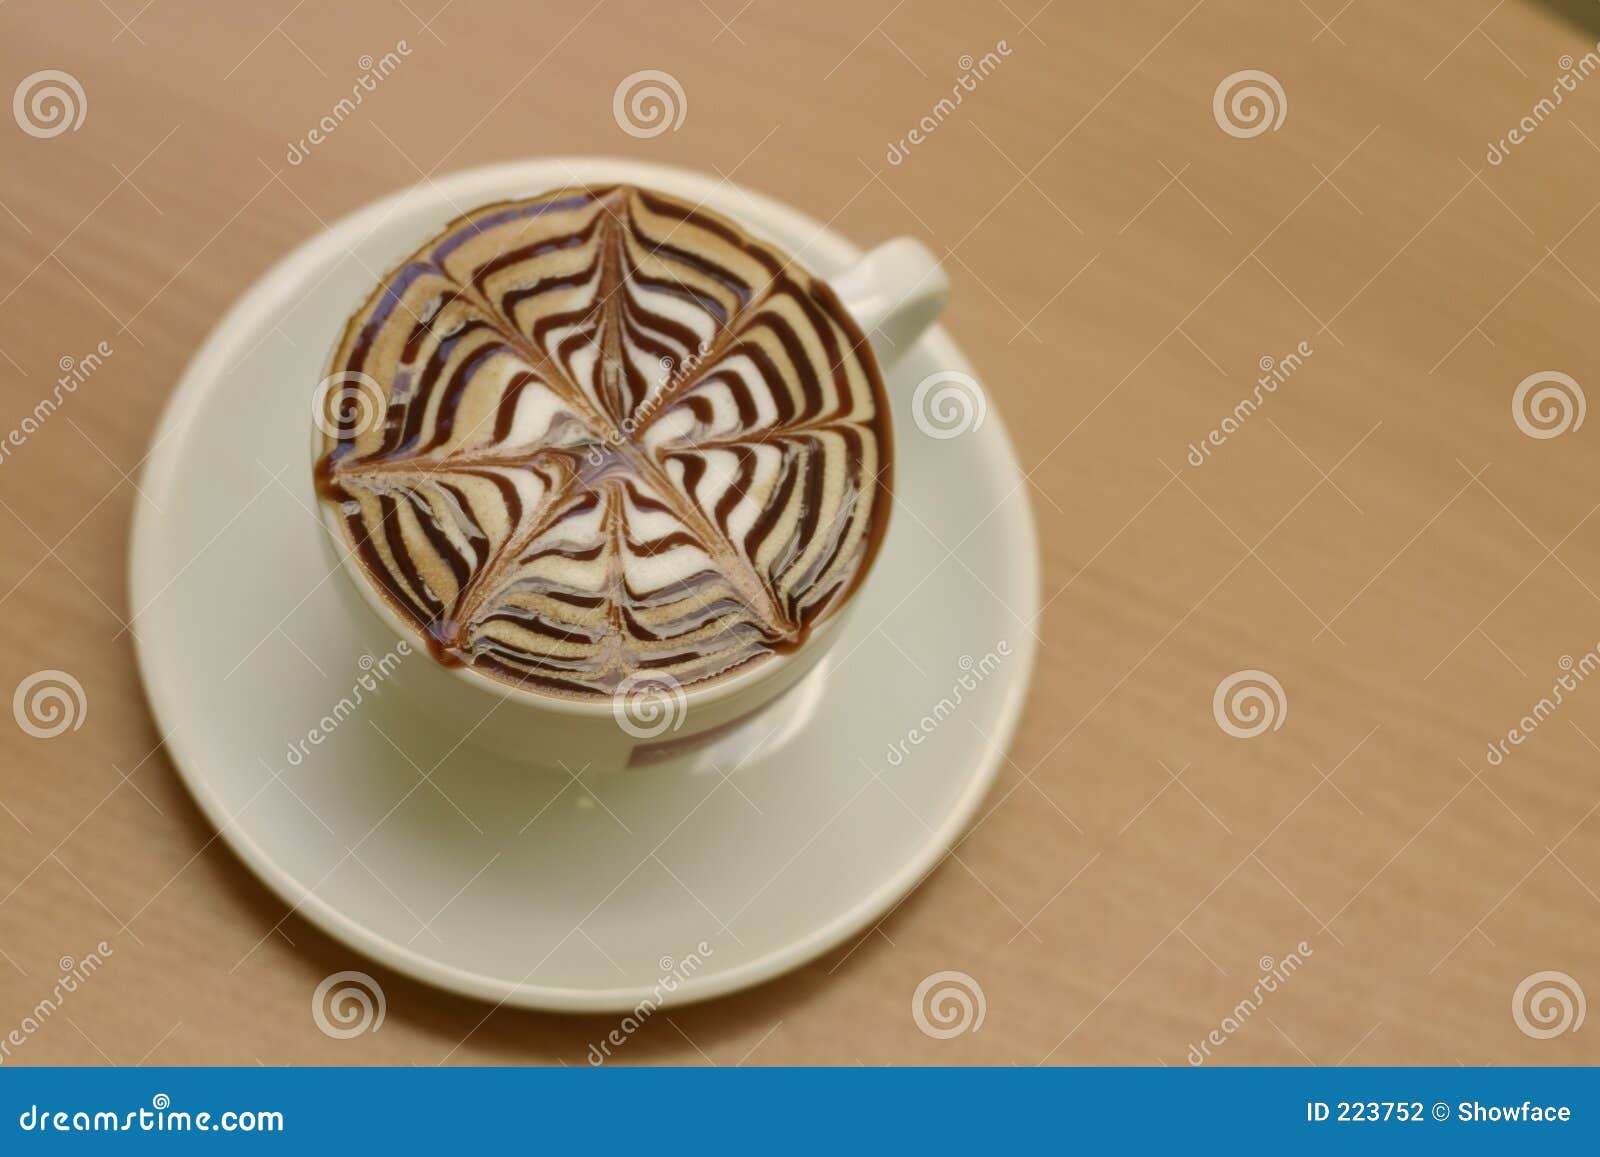 capuccino on a cafe table